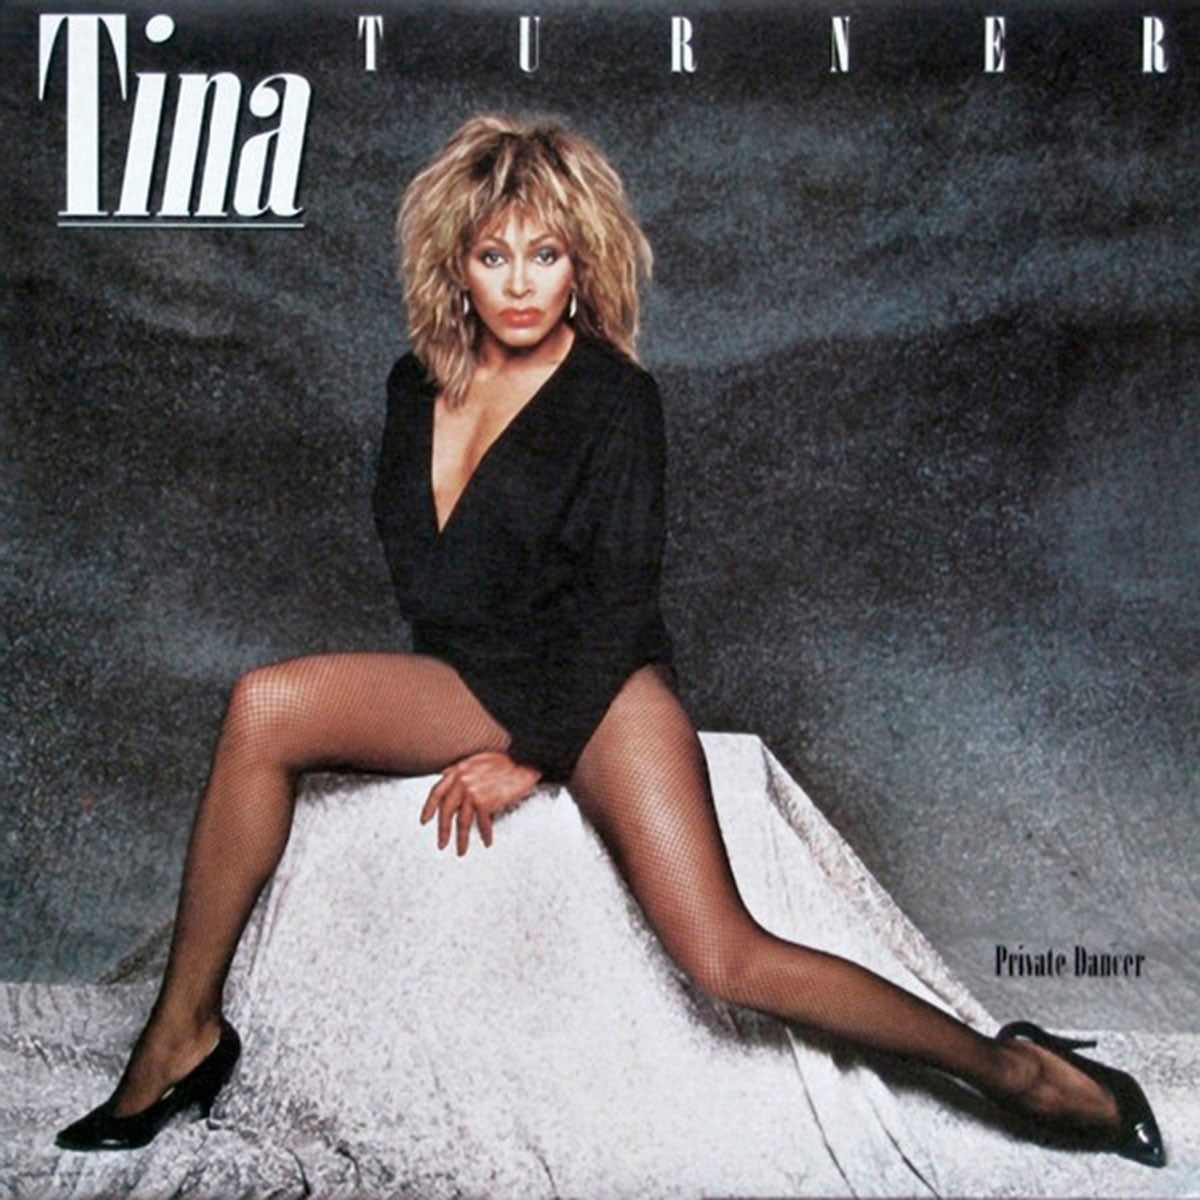 DAILY DEAL! Tina Turner – Private Dancer - 1984 Pressing!